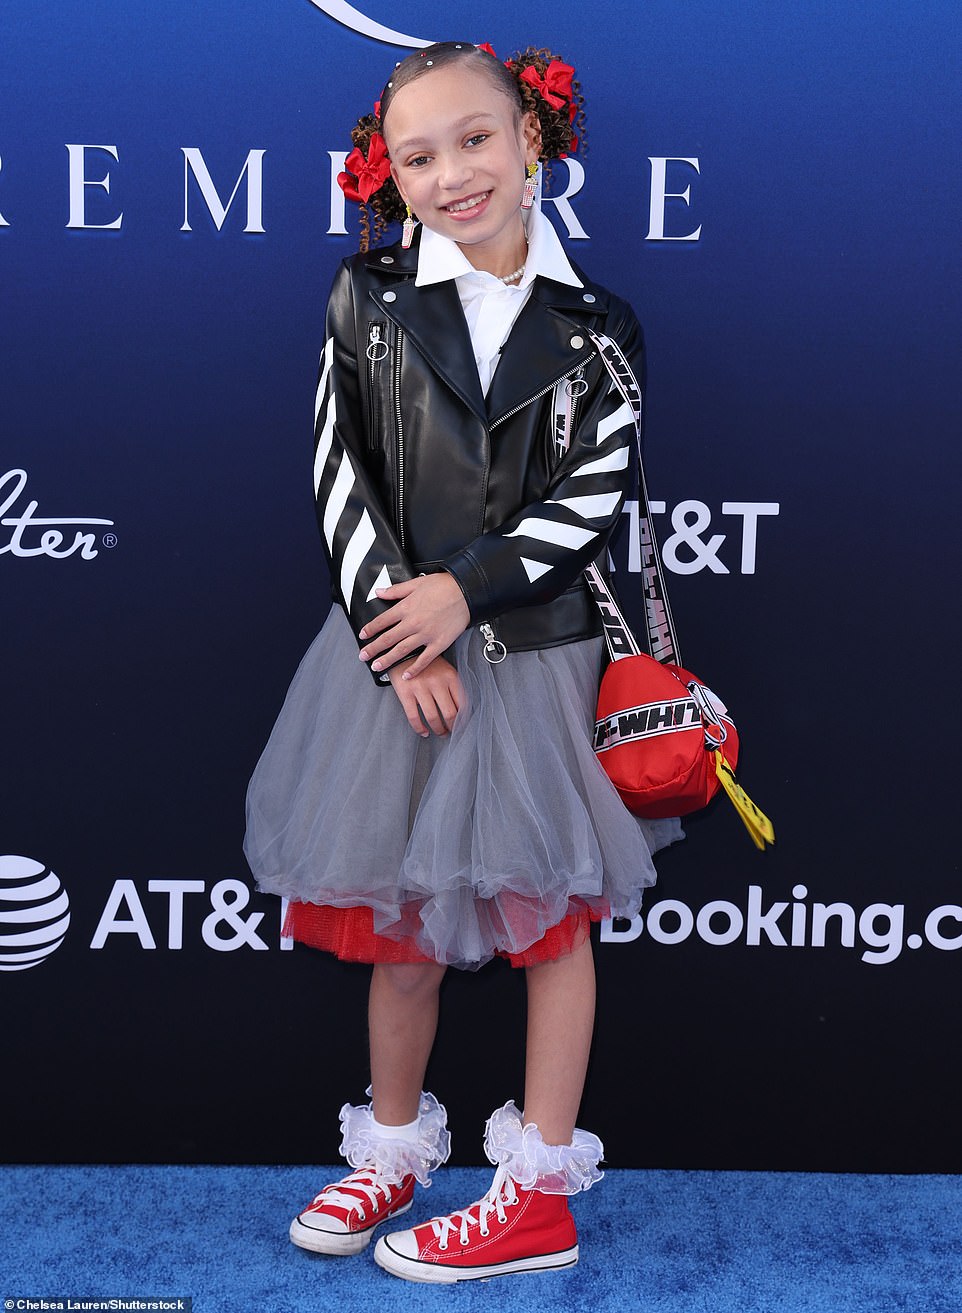 Mykal-Michelle Harris was adorable in curled pigtail buns, a gray and red skirt, and snazzy biker jacket